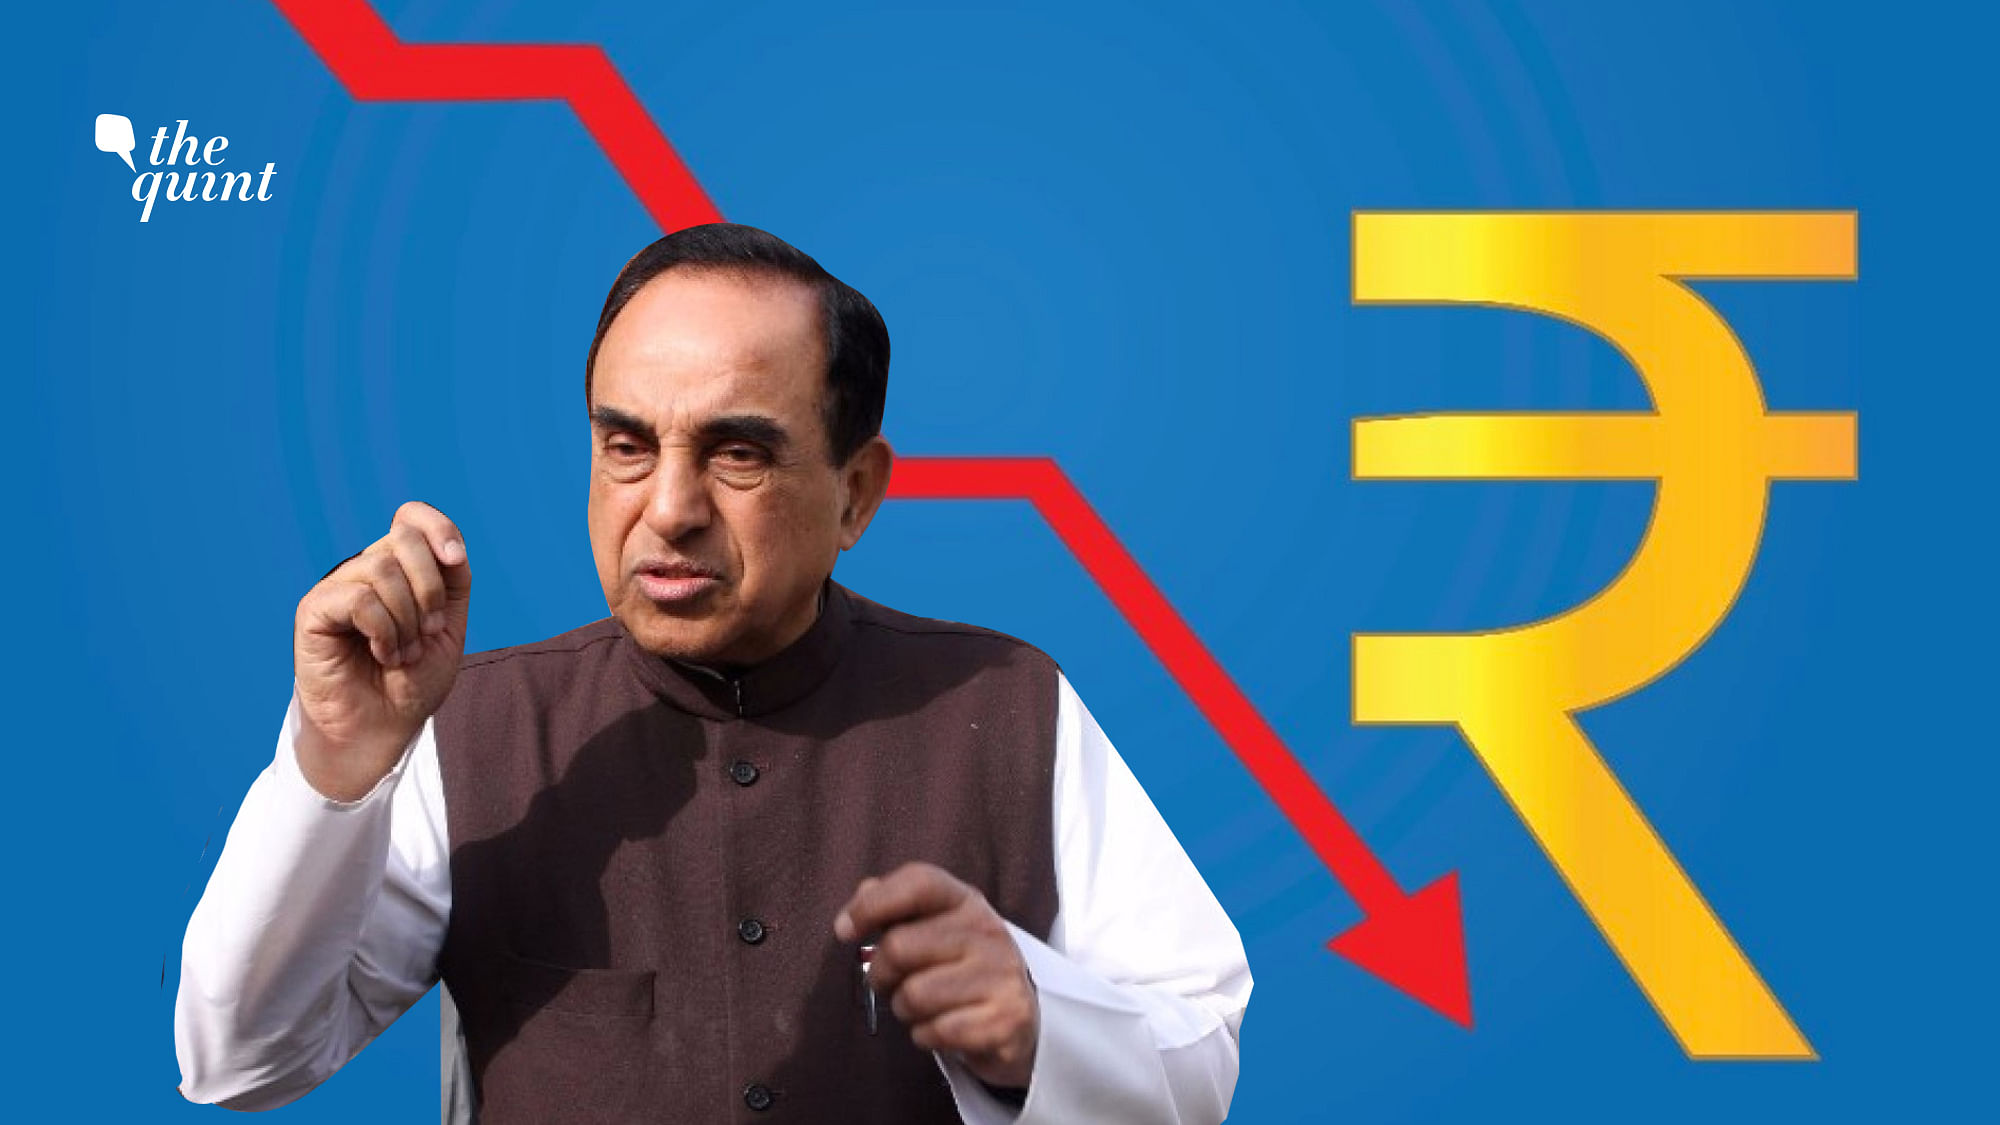 BJP MP Subramanian Swamy lashes out at the govt for paying heed to the wrong advisers who ignore macroeconomics.